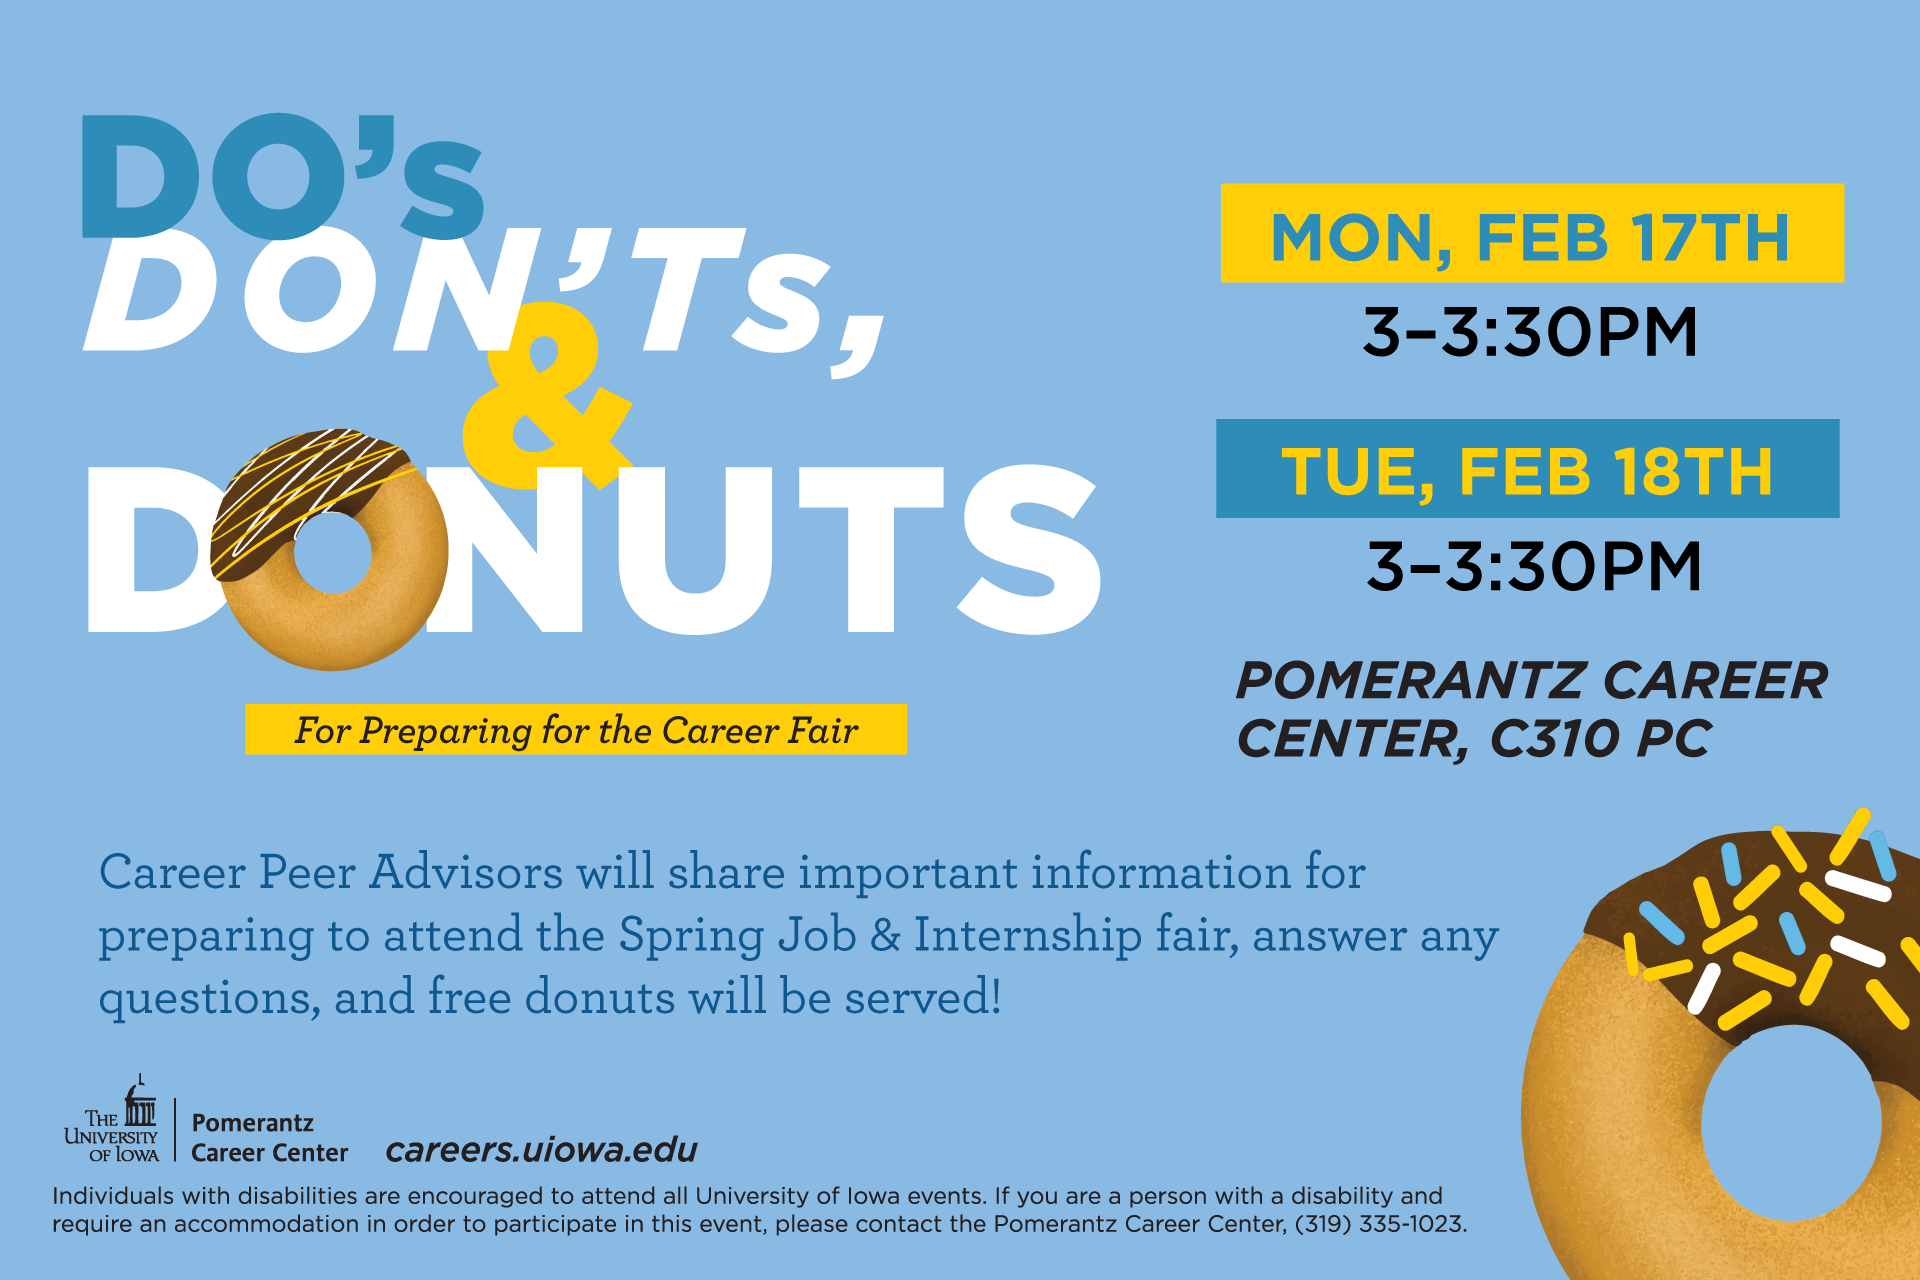 Do's, Don't, & Donuts